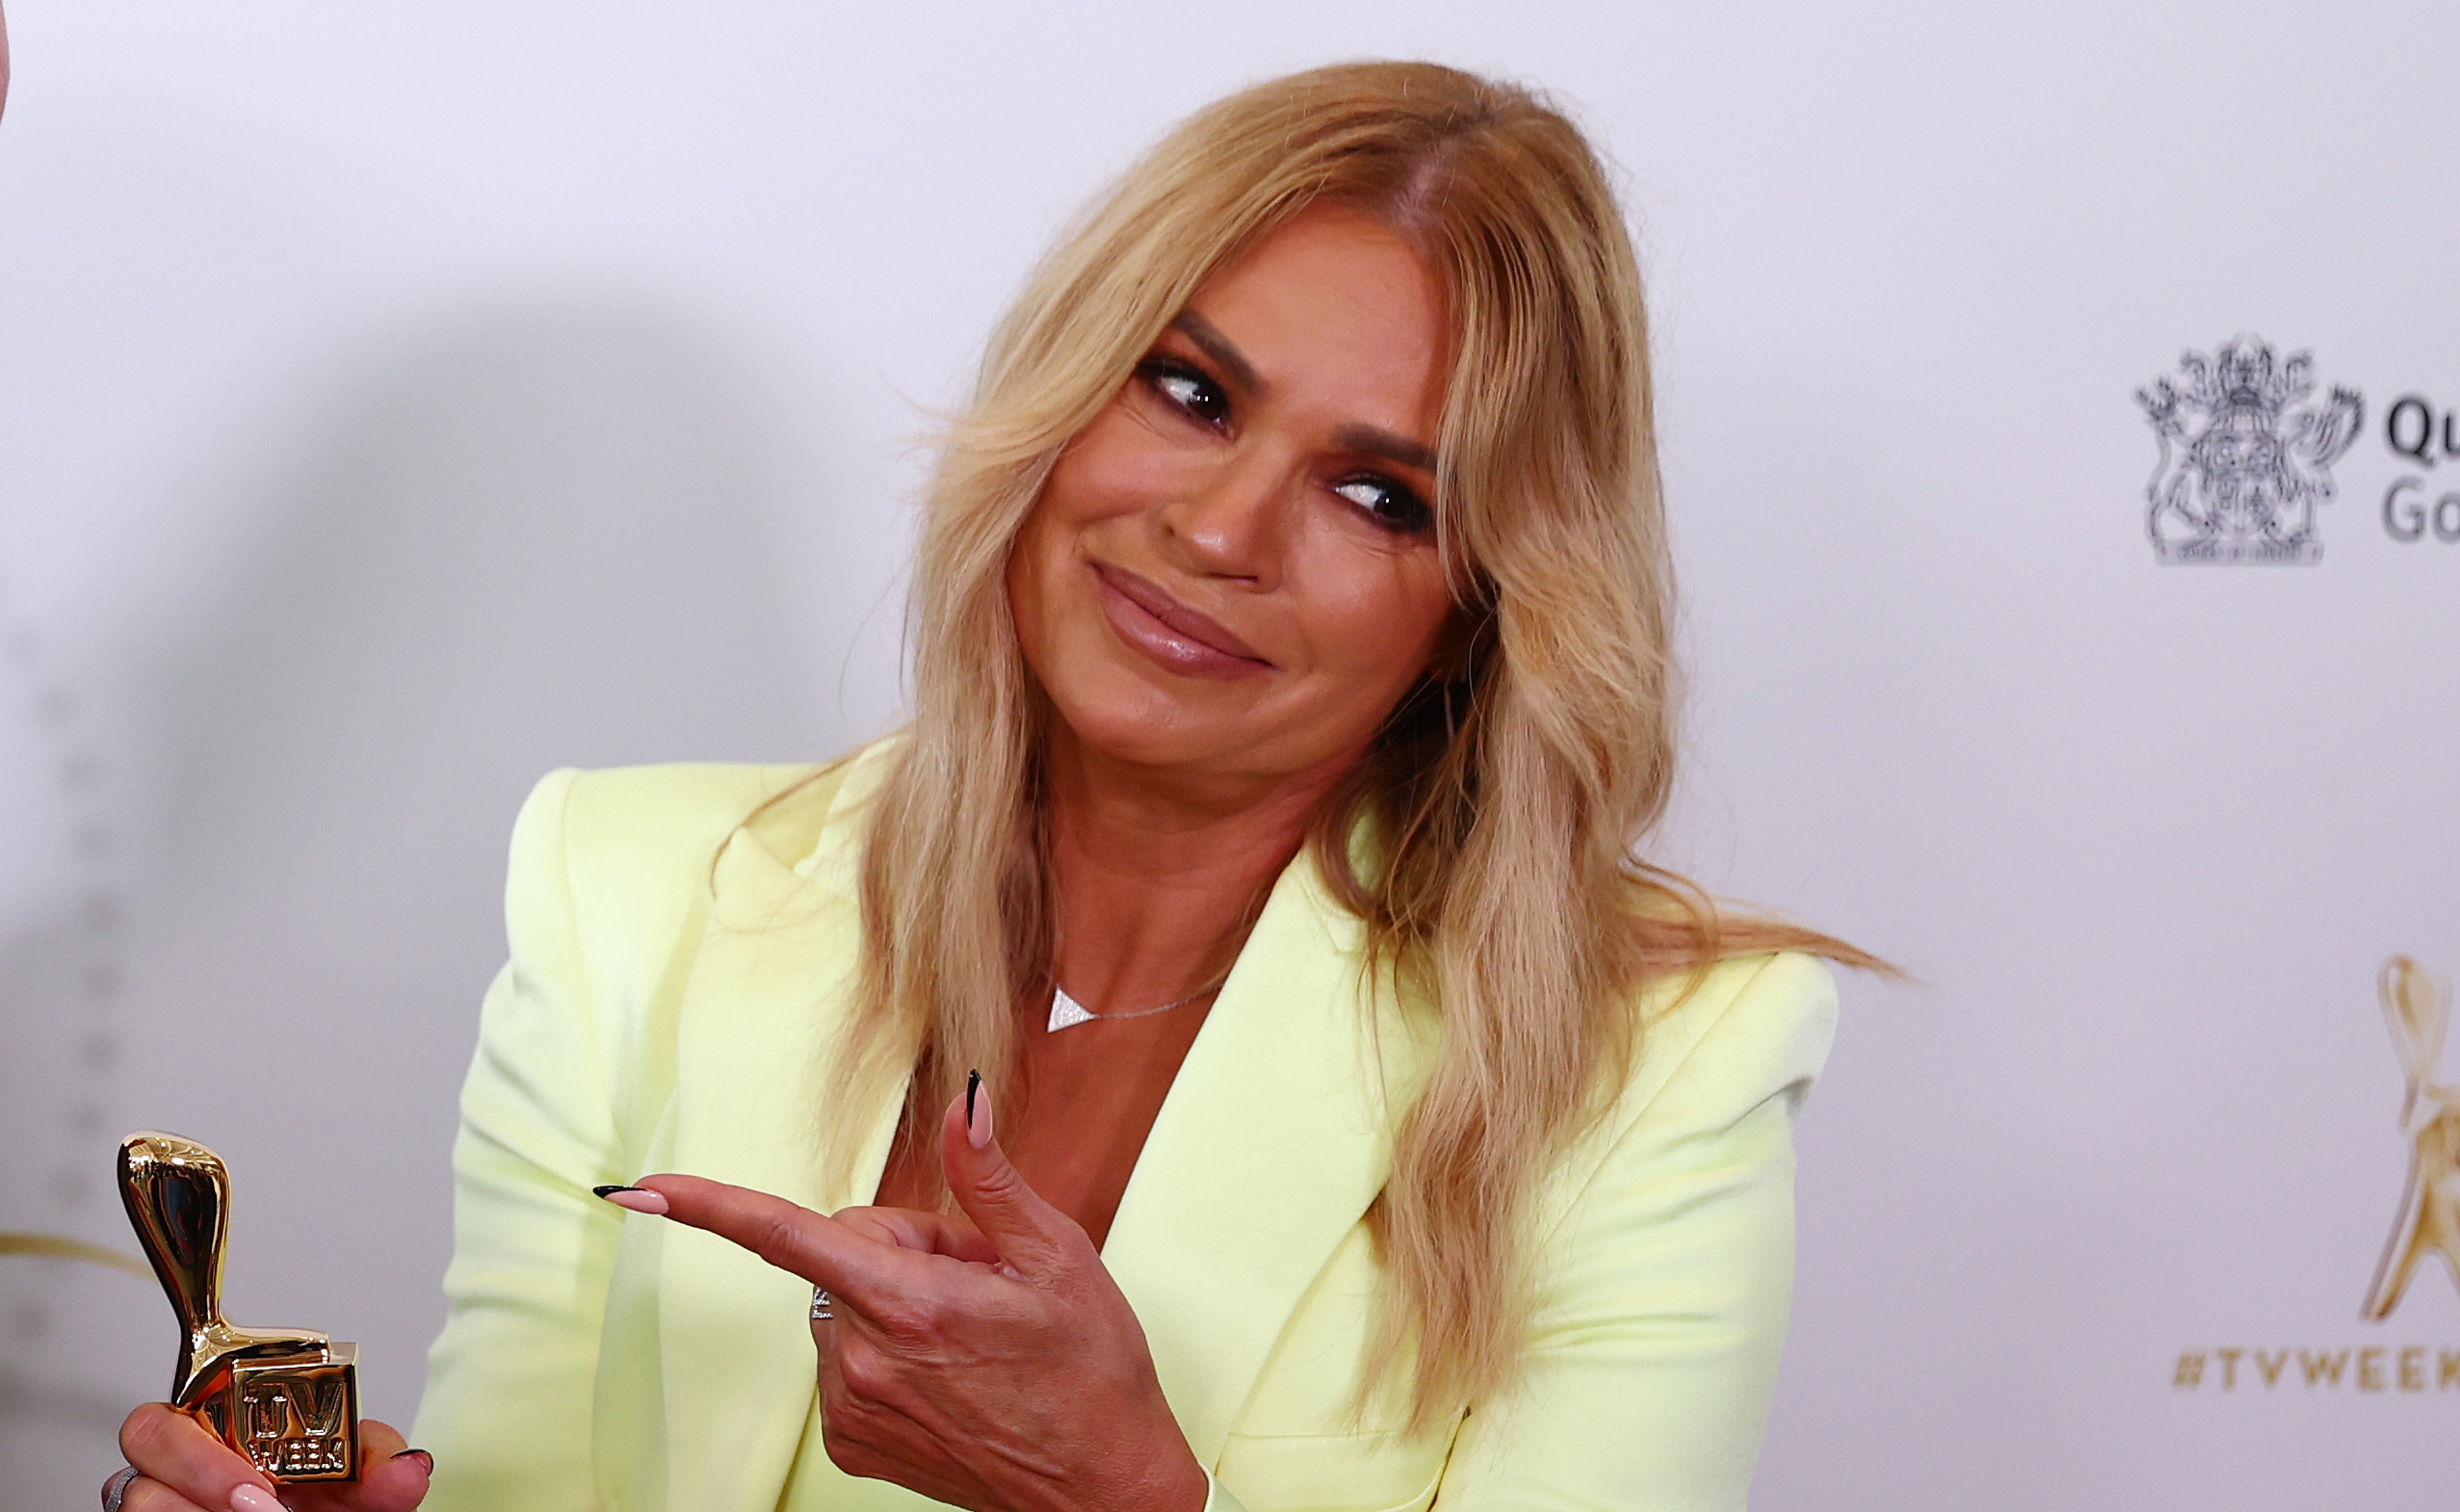 Sonia Kruger reveals the real reason she doesn’t look her age: “It’s inevitable that we’re going to get older”